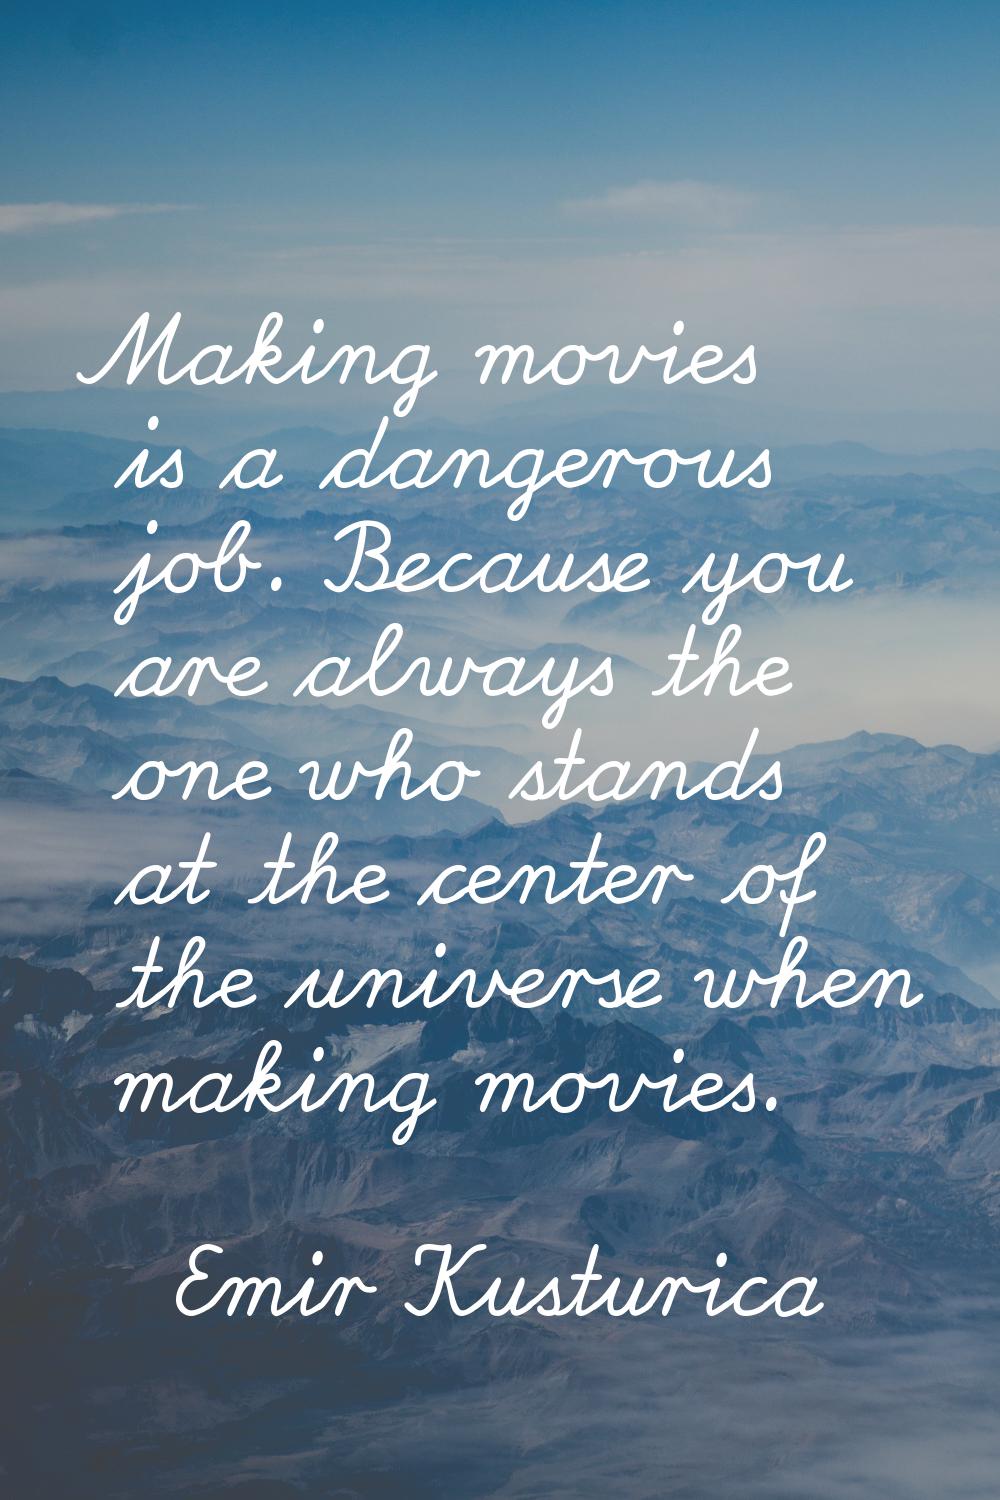 Making movies is a dangerous job. Because you are always the one who stands at the center of the un